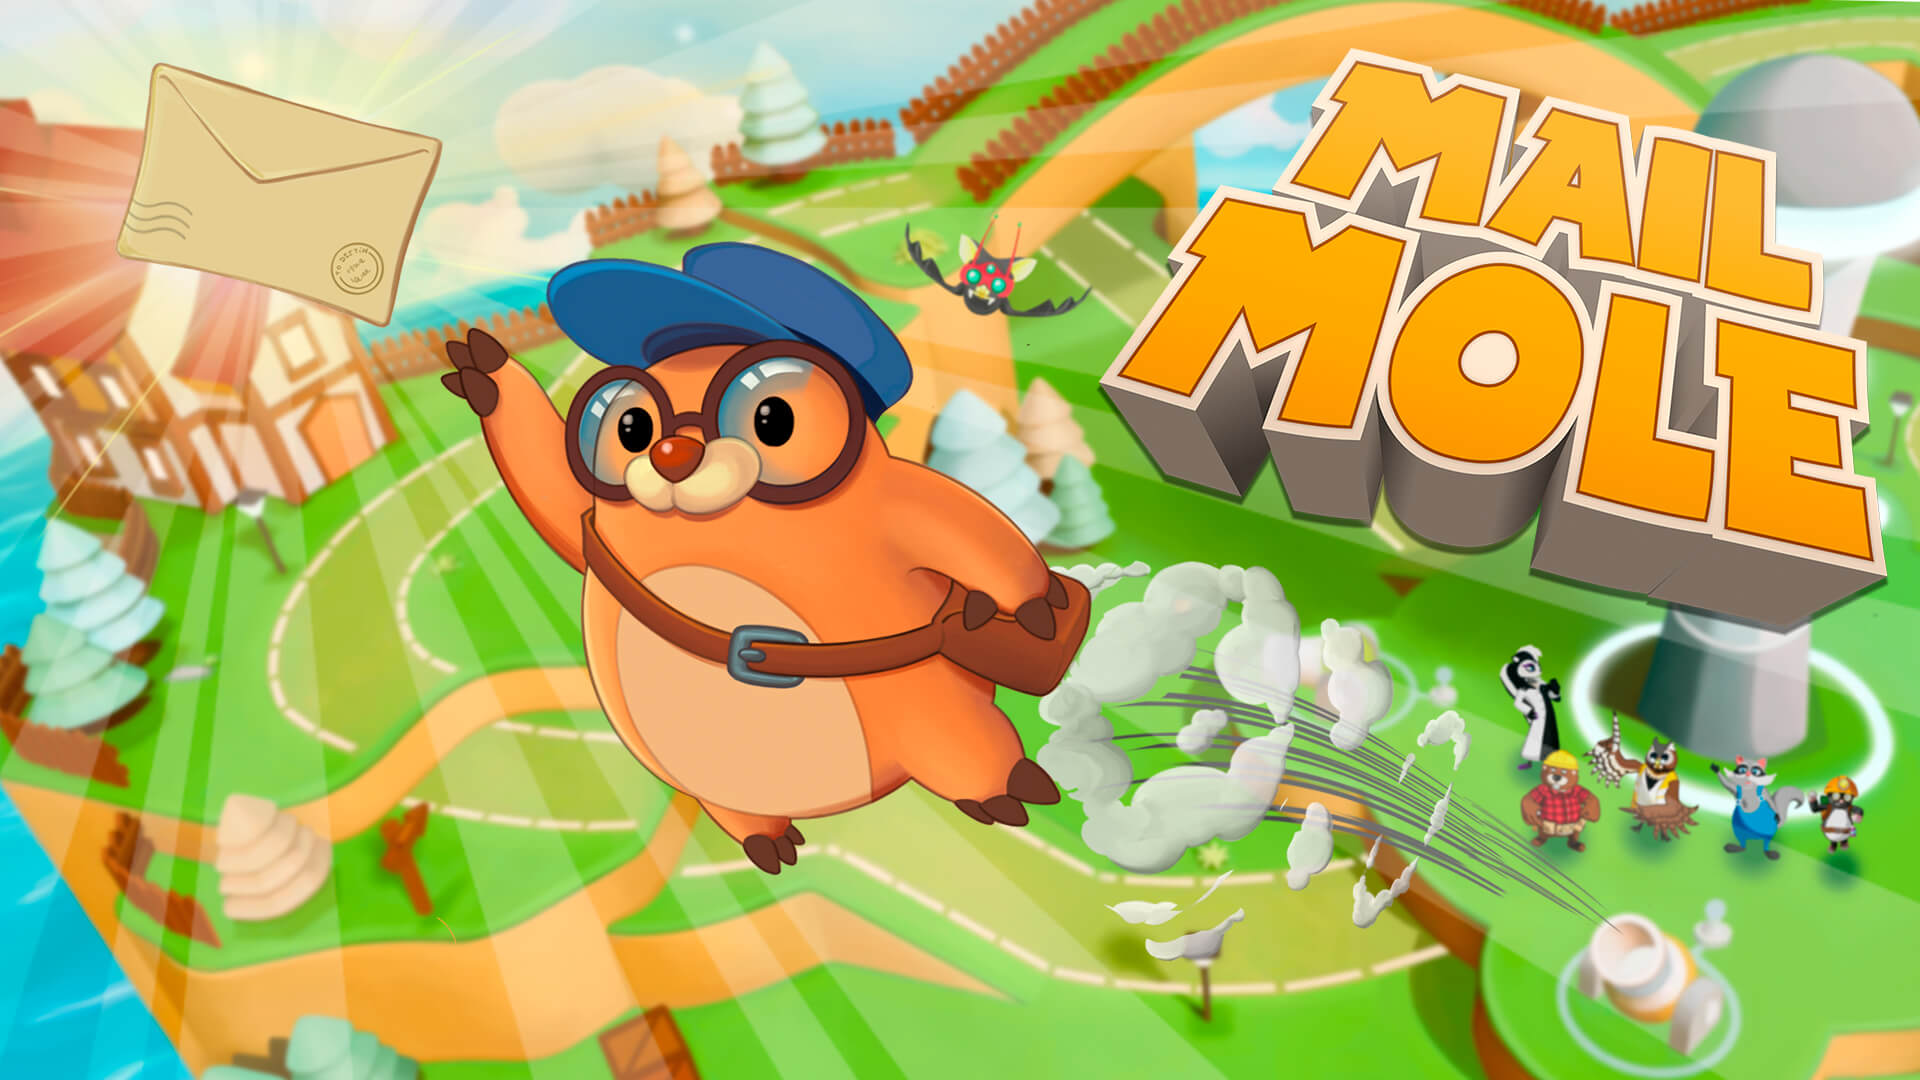 Mail Mole Free PC Download